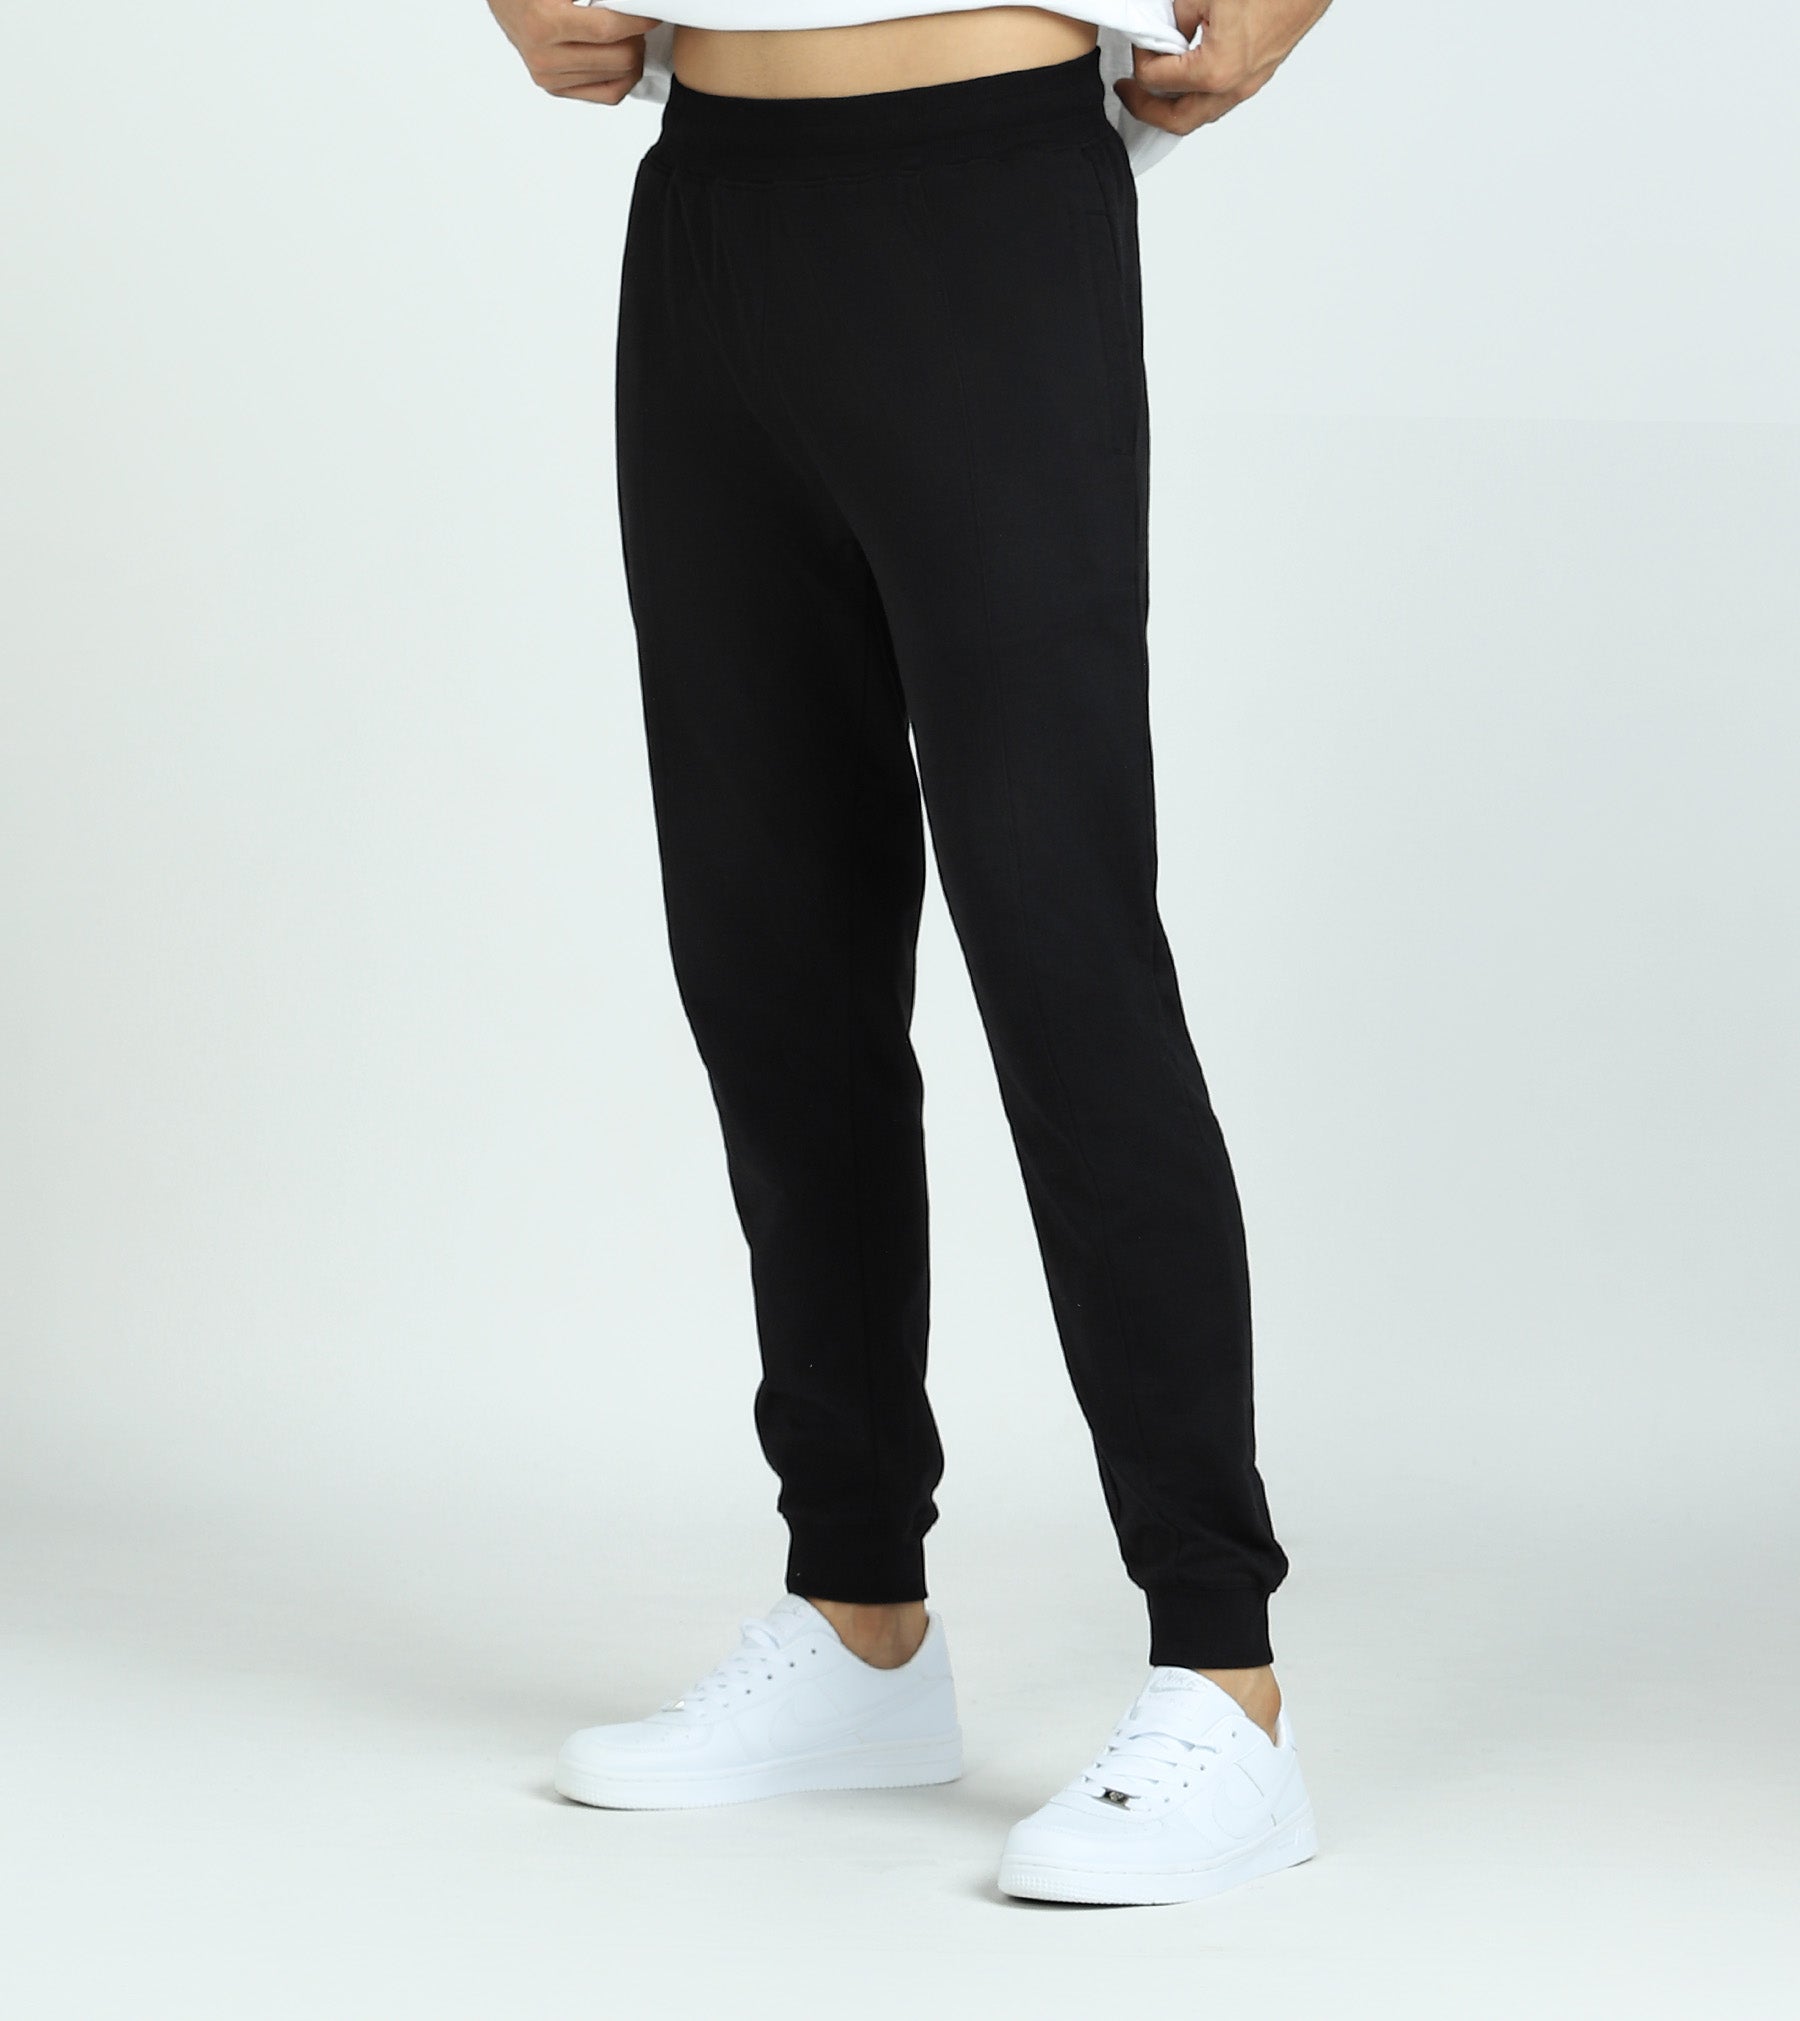 Cruze French Terry Cotton SweatShirt and Joggers Co-ord Set For Men Pitch Black - XYXX Mens Apparels